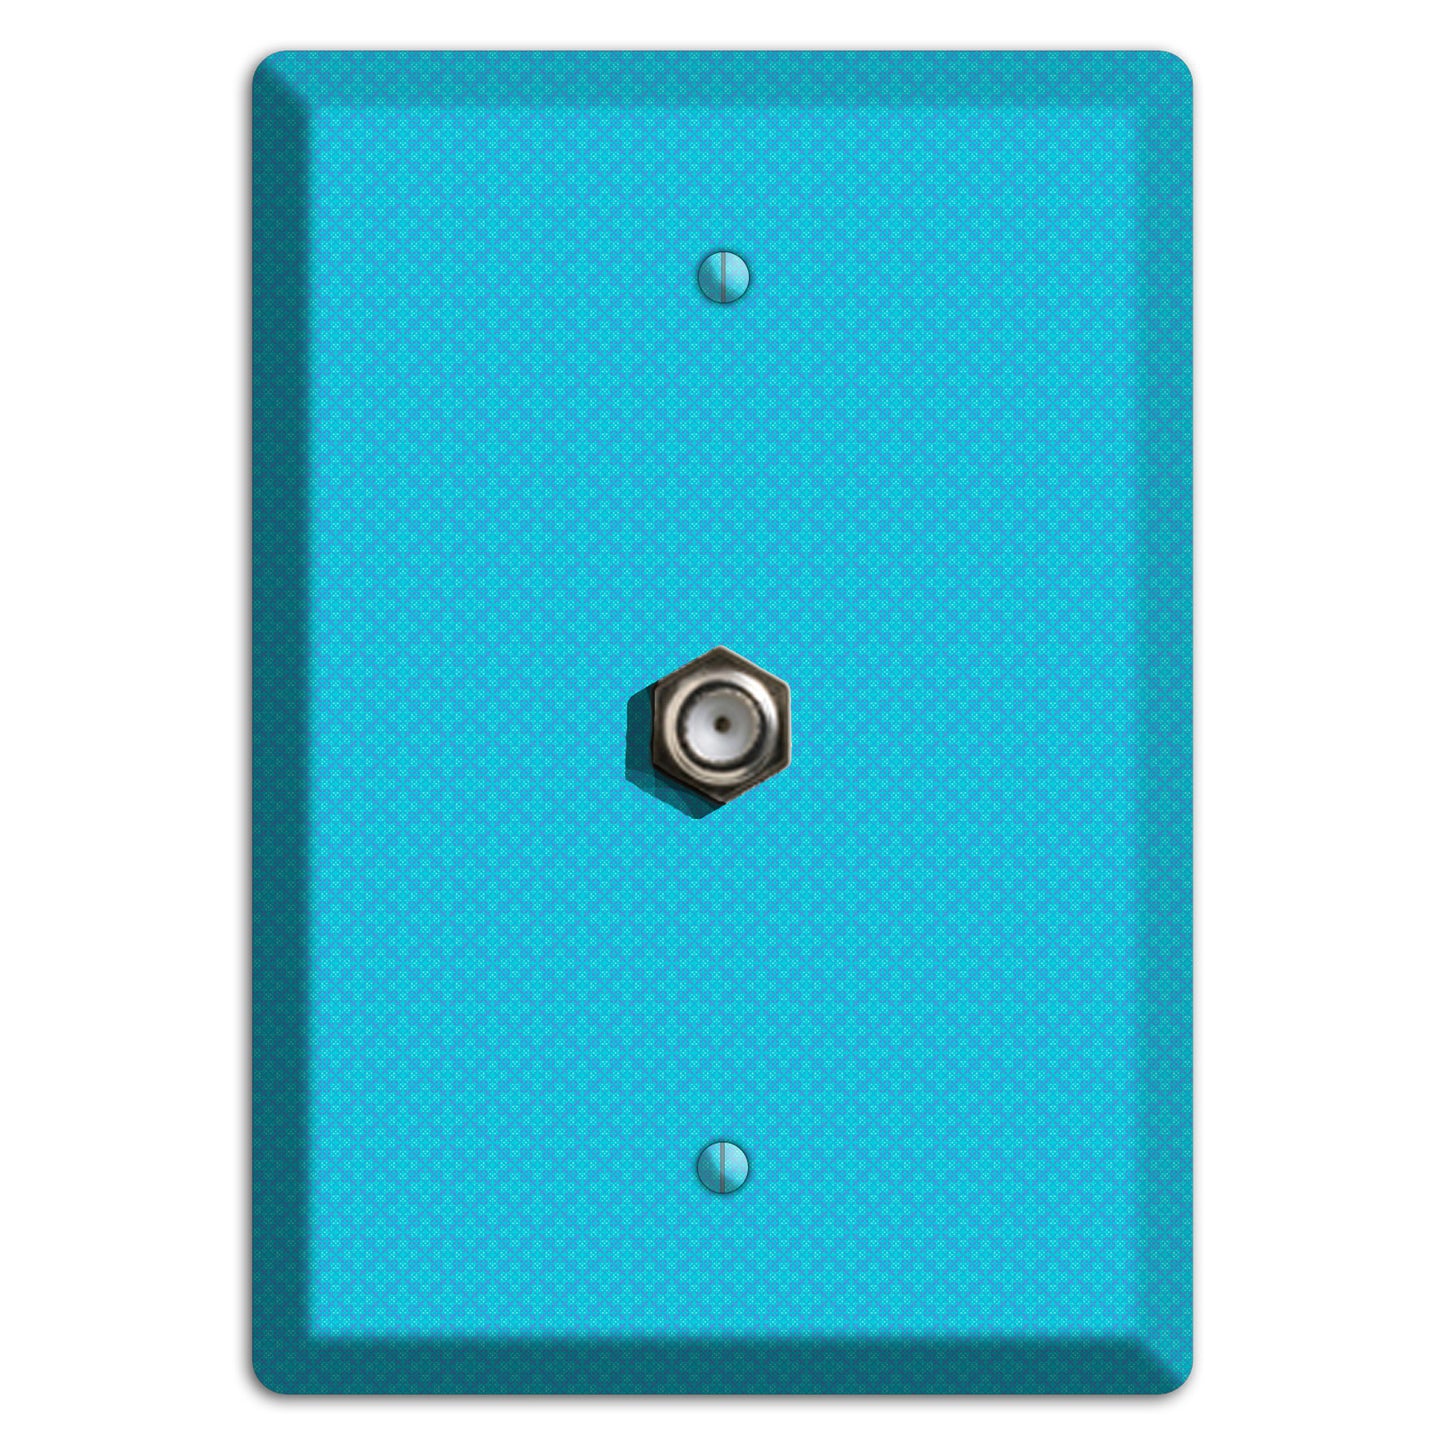 Turquoise Checkered Quatrefoil Cable Wallplate